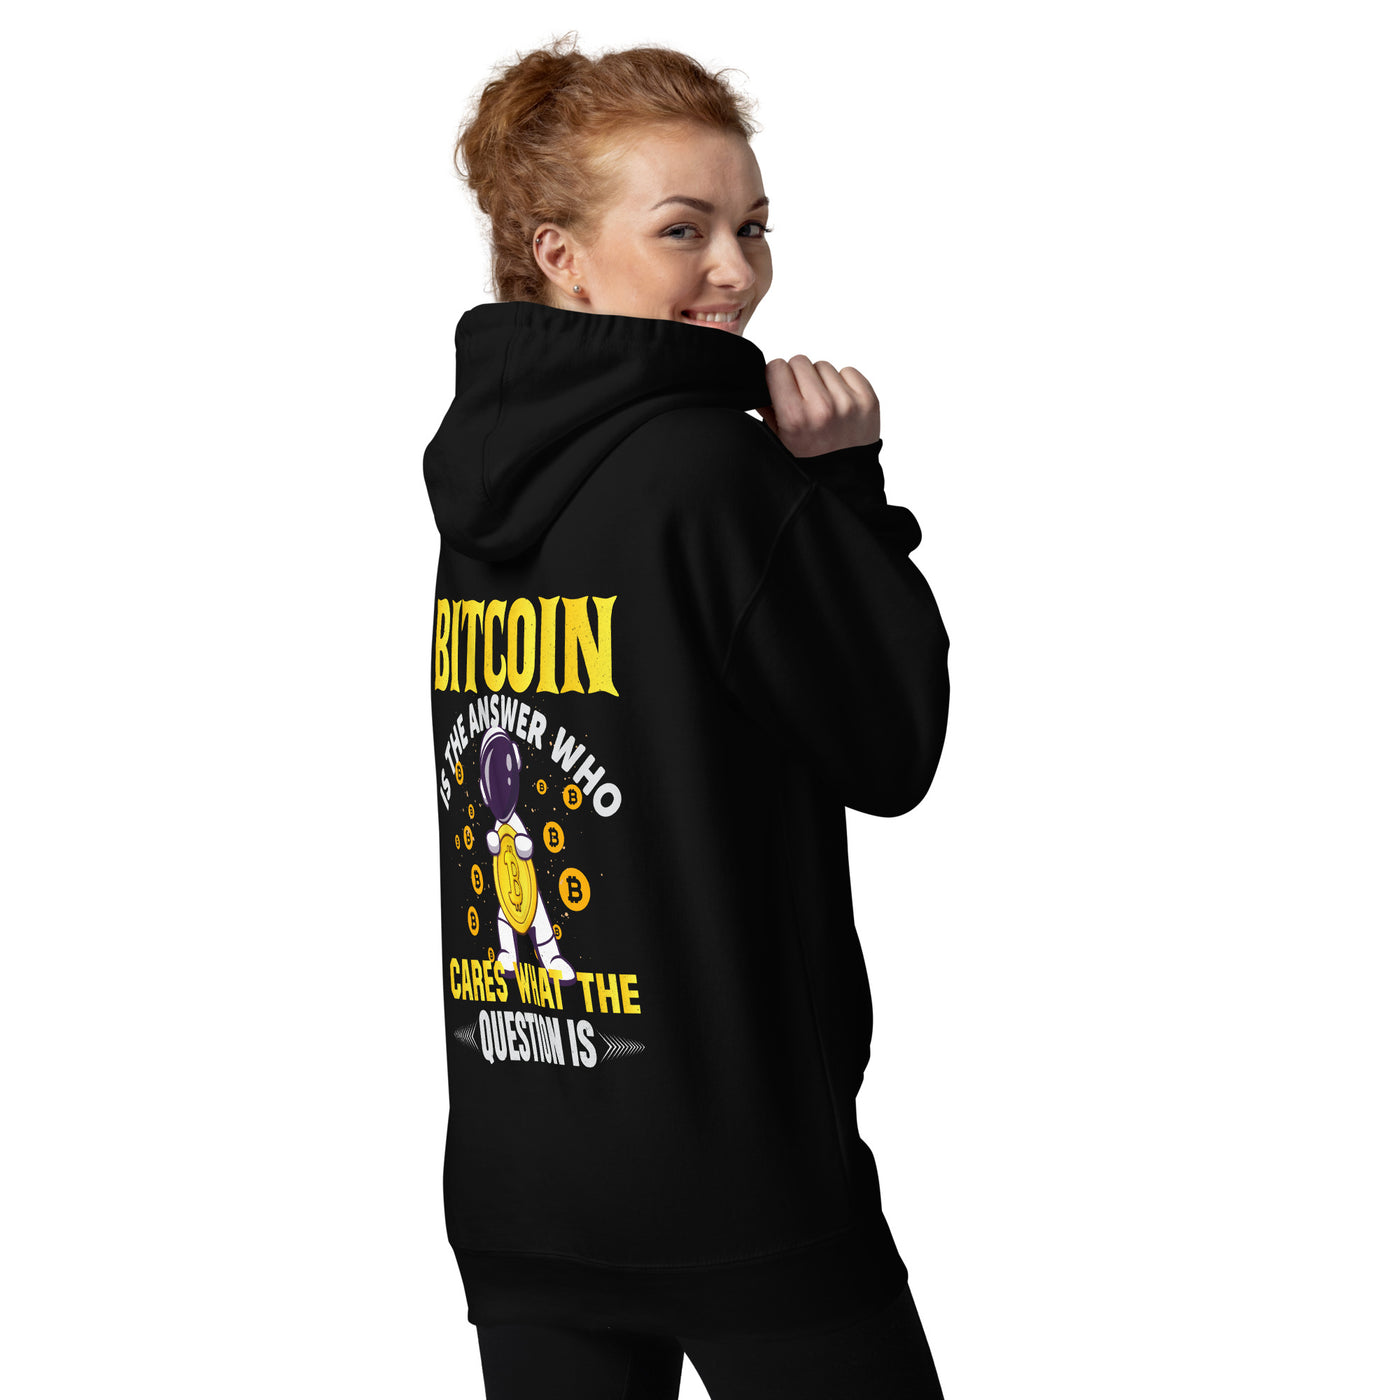 Bitcoin is the Answer! Who Cares what the question is? - Unisex Hoodie ( Back Print )